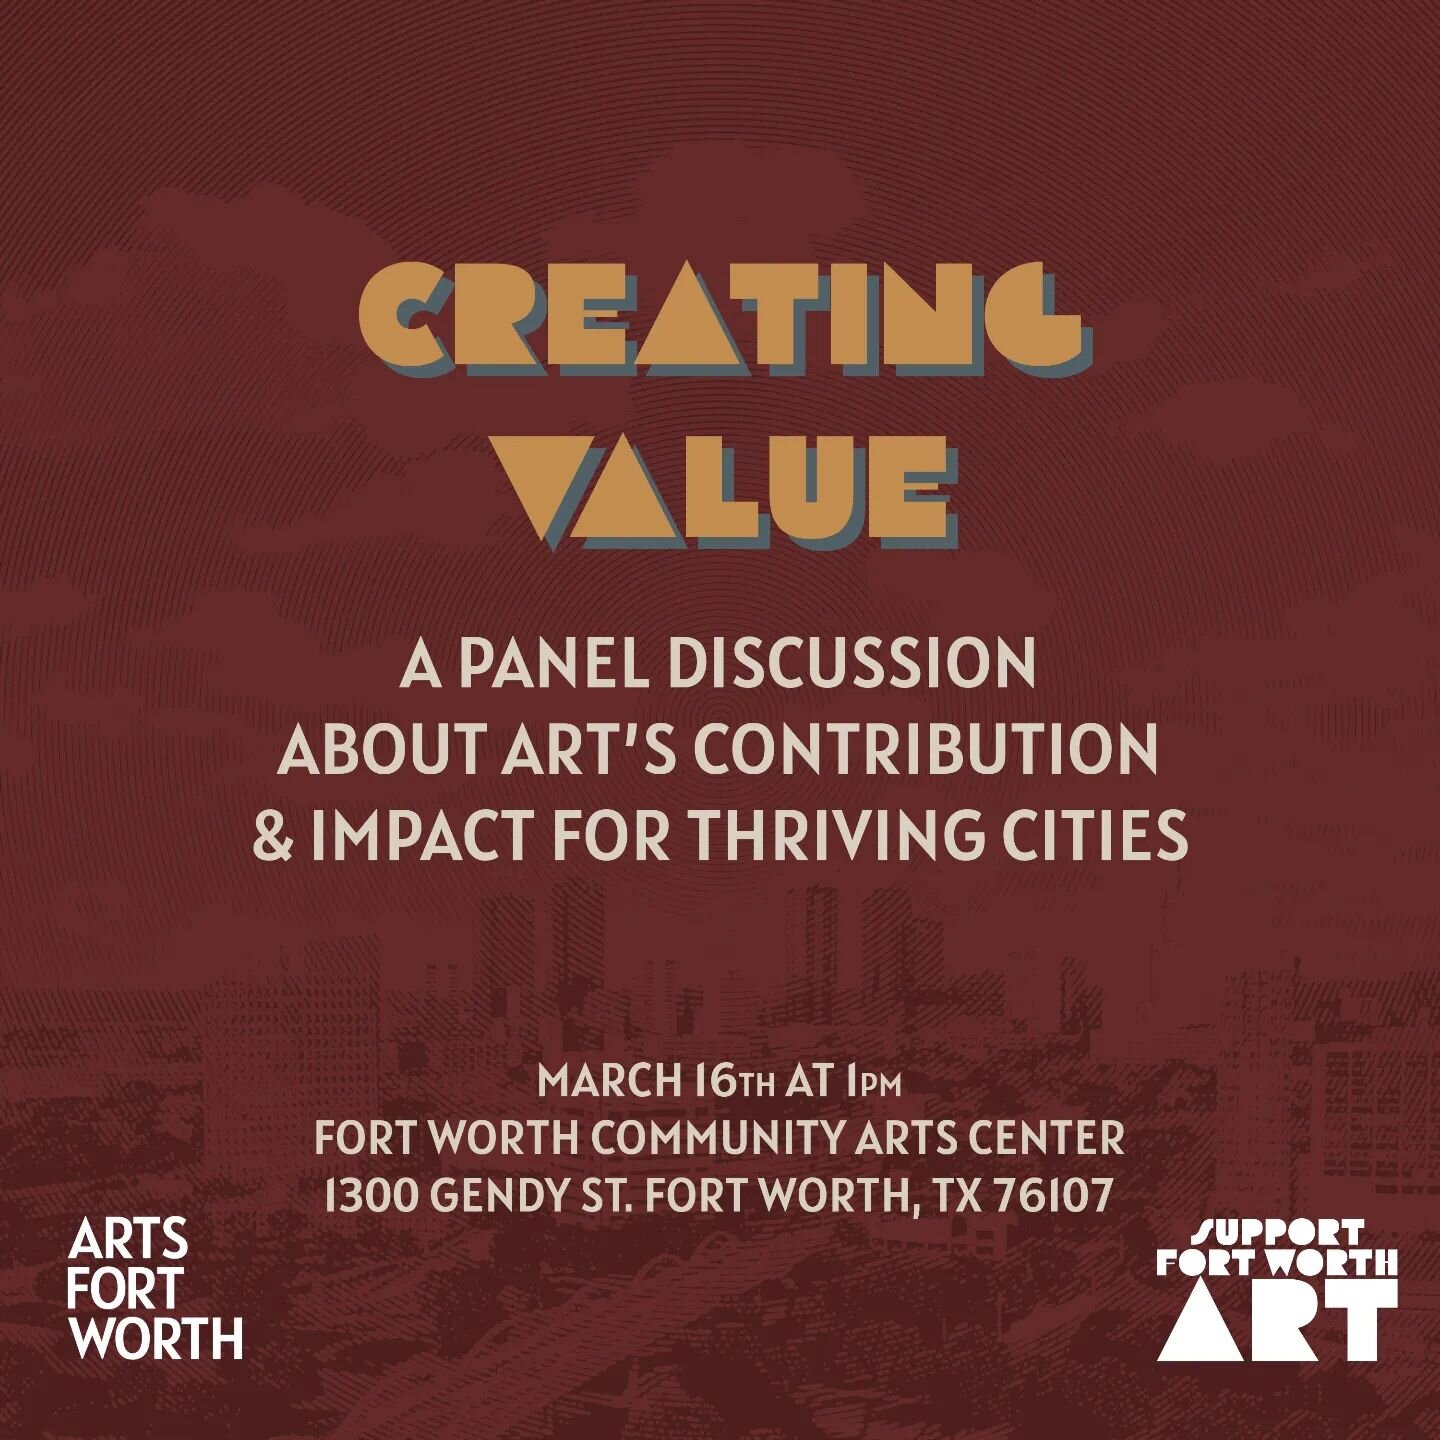 This Saturday is the last panel discussion for our show Together We Make Art Happen. We'll talk about how the arts contribute to quality of life and its impact on creating thriving cities. We have wonderful speakers such as Fort Worth City Councilmem